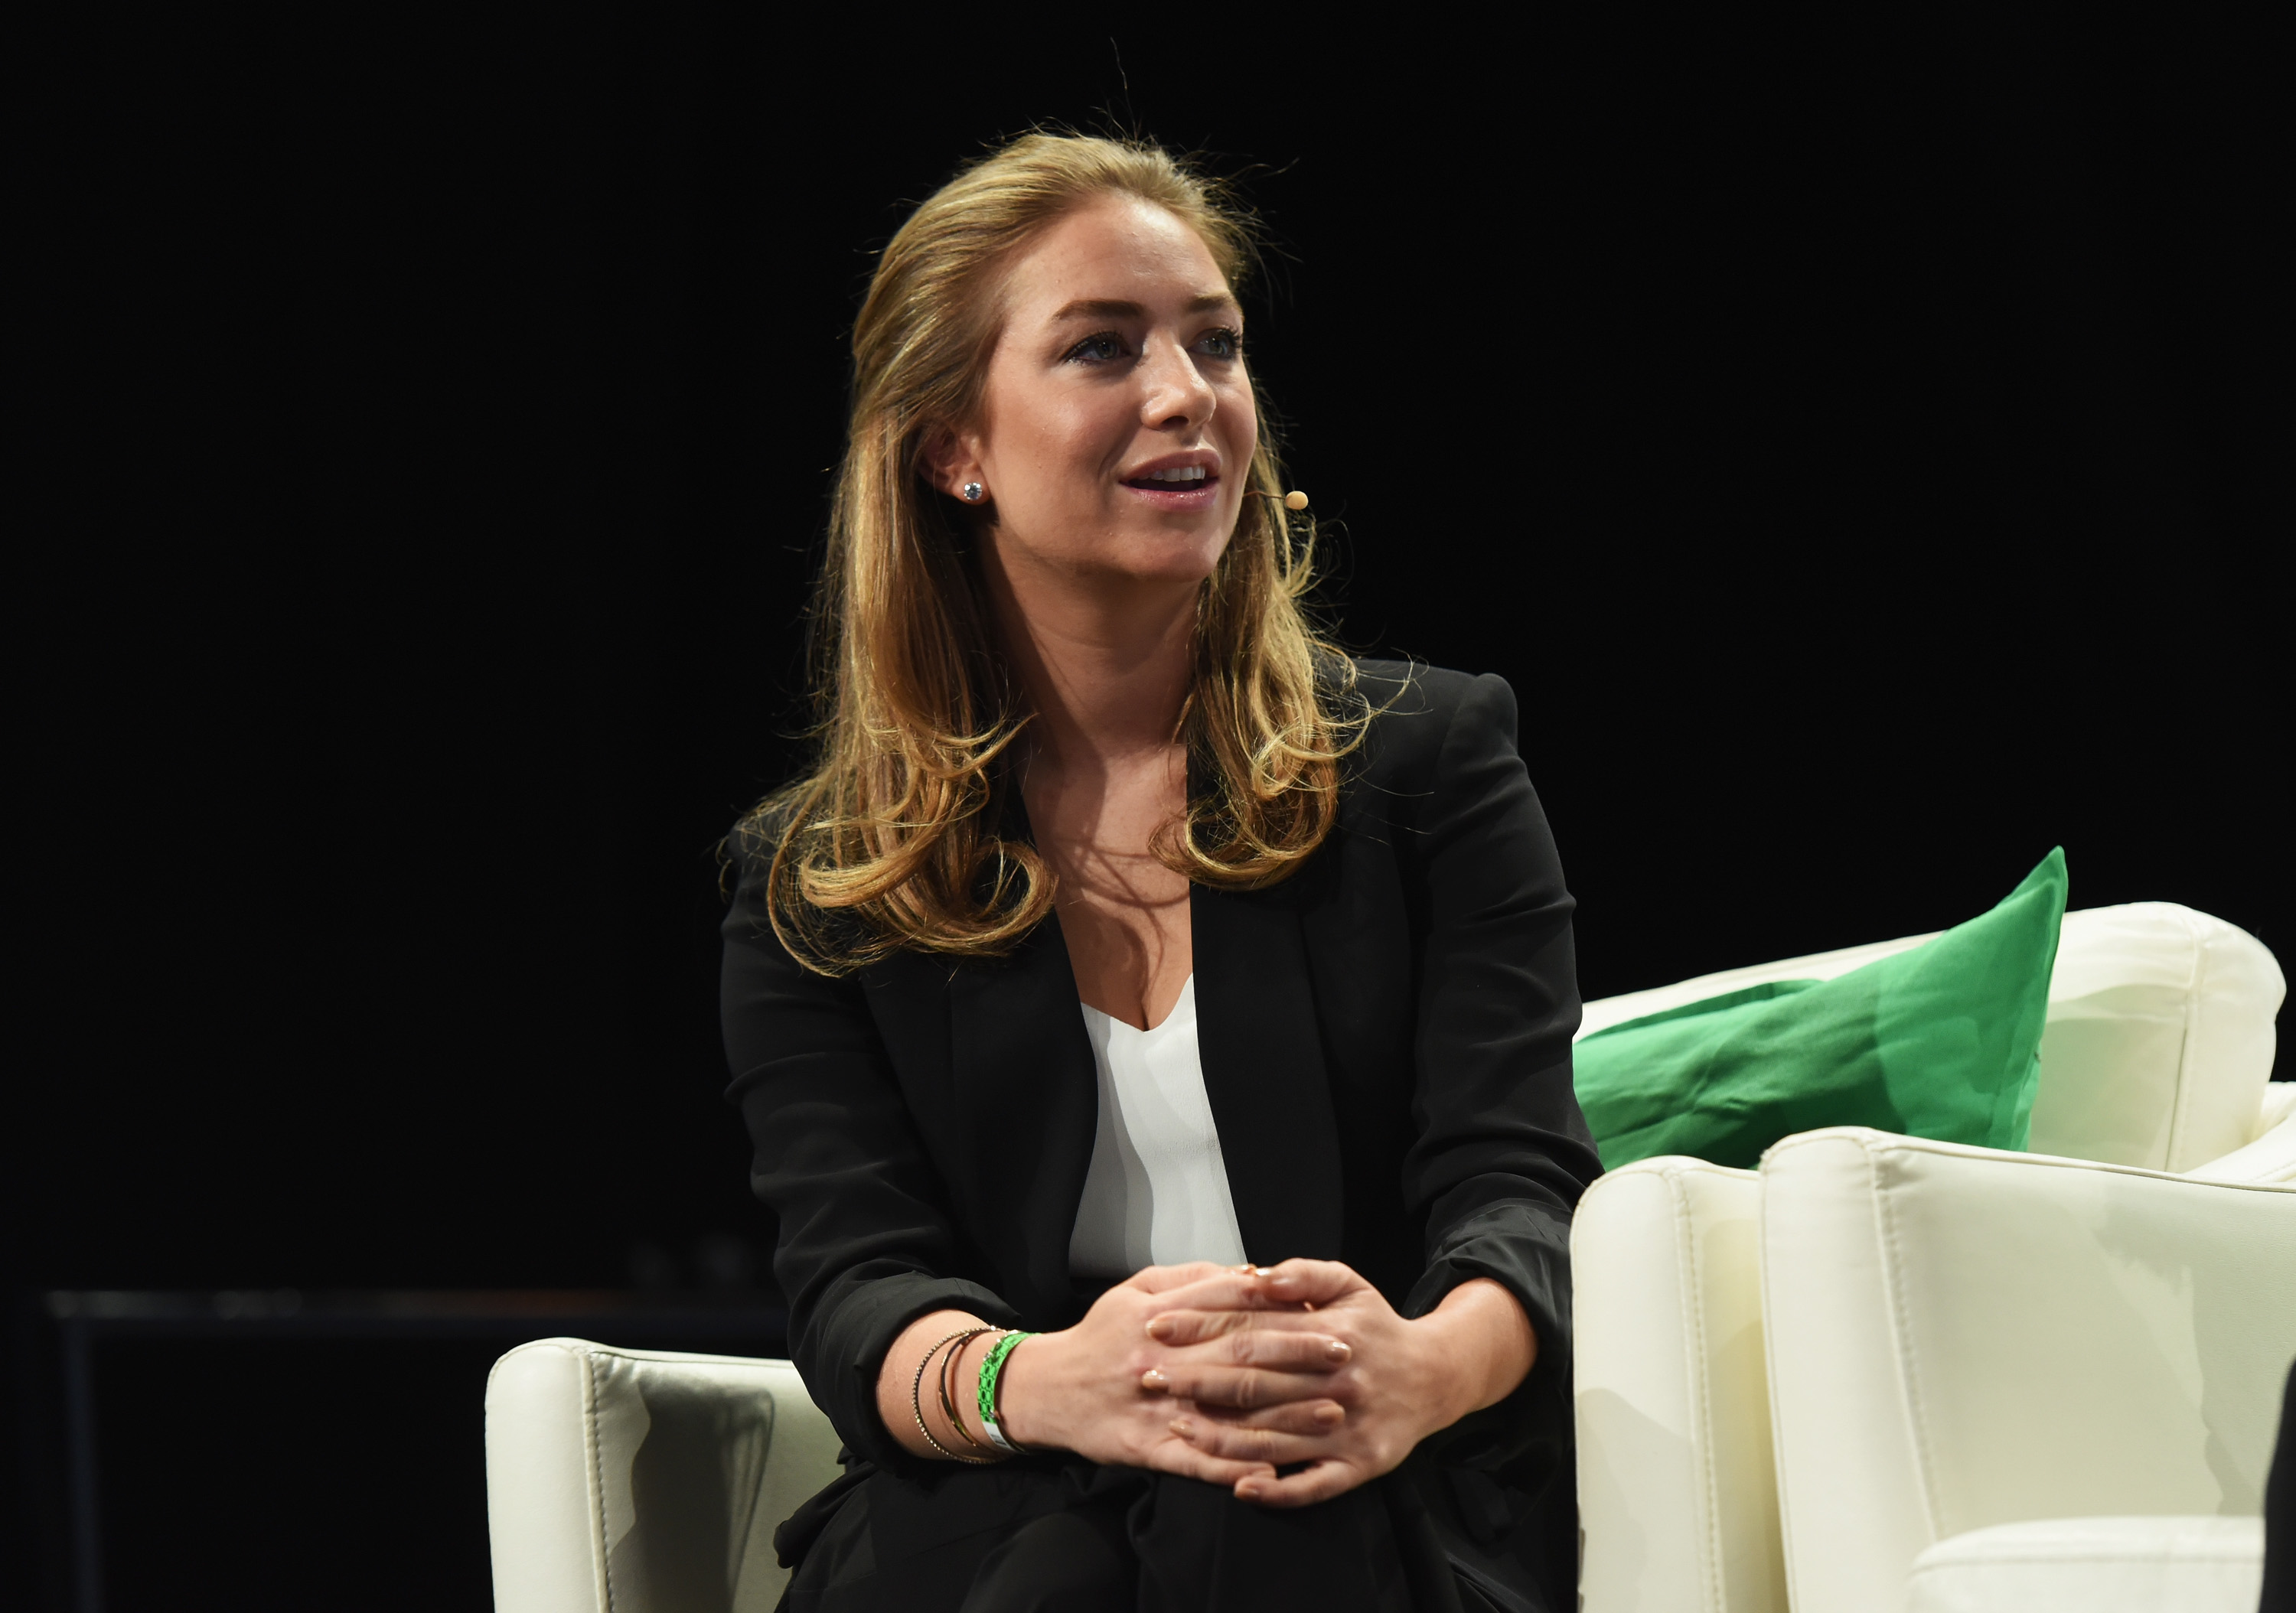 NEW YORK, NY - MAY 11:  Co-founder and CEO of Bumble Whitney Wolfe speaks onstage during TechCrunch Disrupt NY 2016 at Brooklyn Cruise Terminal on May 11, 2016 in New York City.  (Photo by Noam Galai/Getty Images for TechCrunch) (Noam Galai&mdash;Getty Images for TechCrunch)